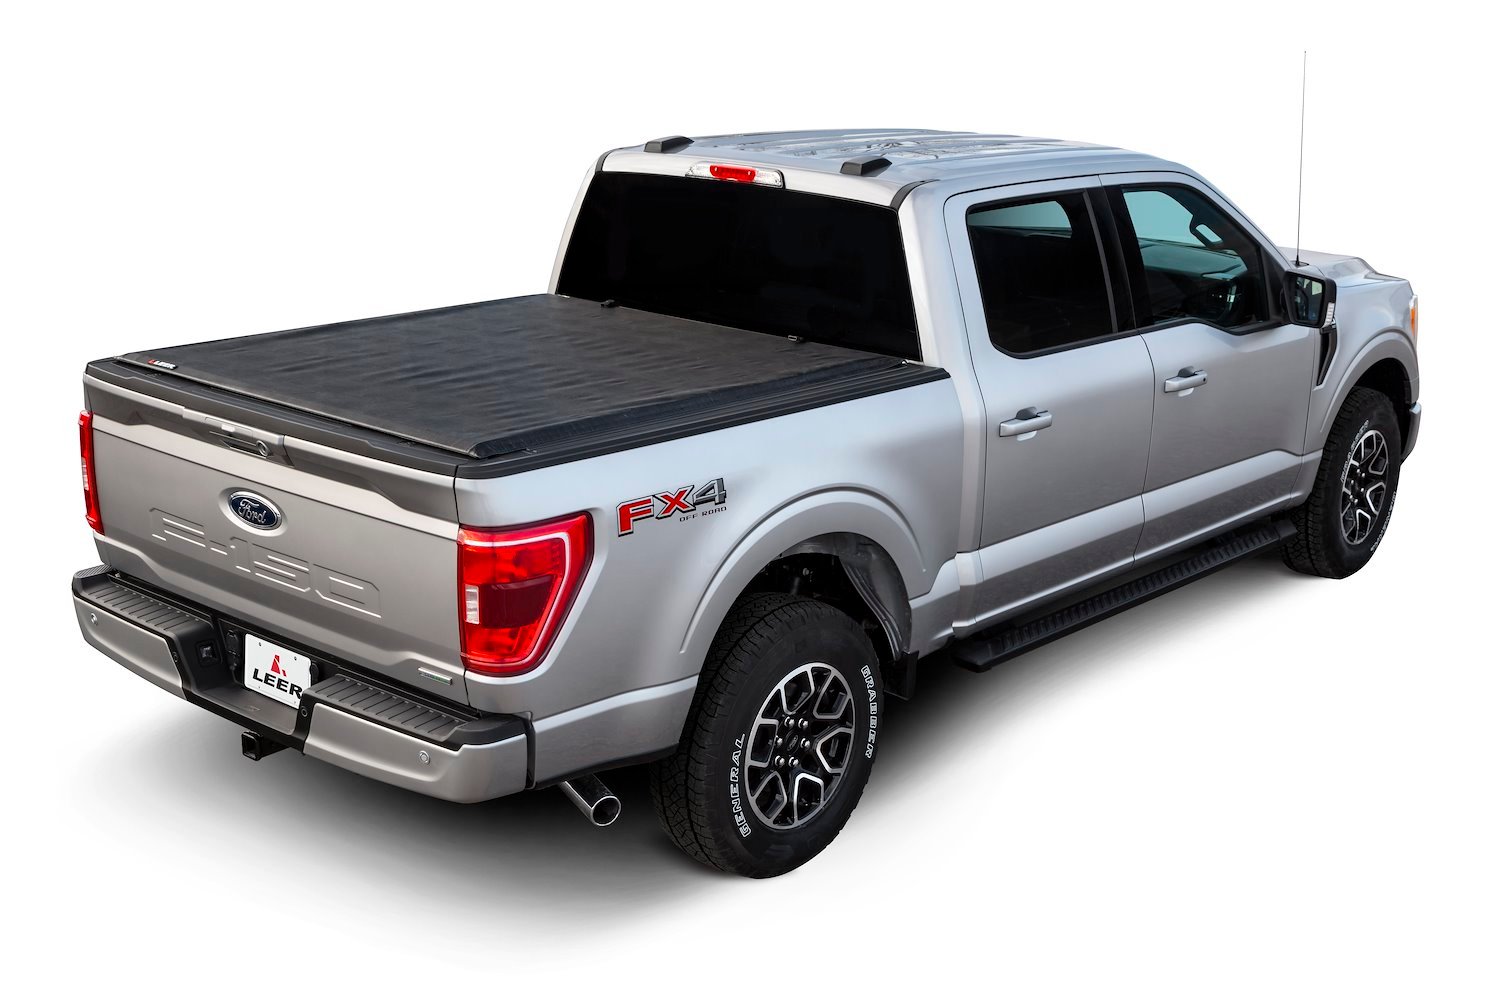 SR250 Soft Rolling Tonneau Cover Fits Select Ford